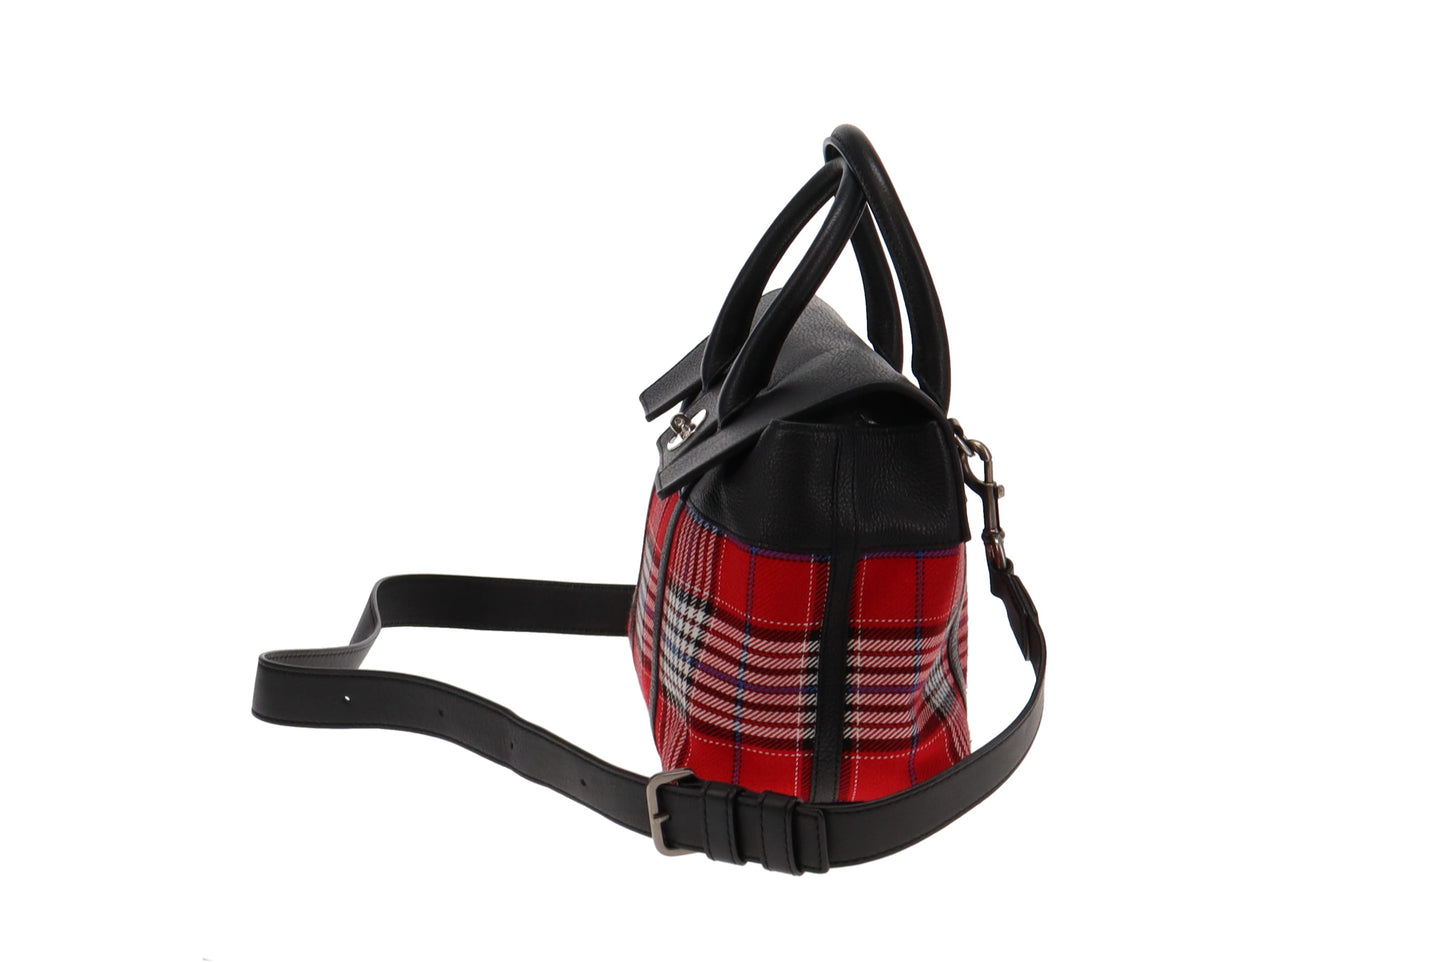 Mulberry Black Leather and Red Tartan Small Bayswater